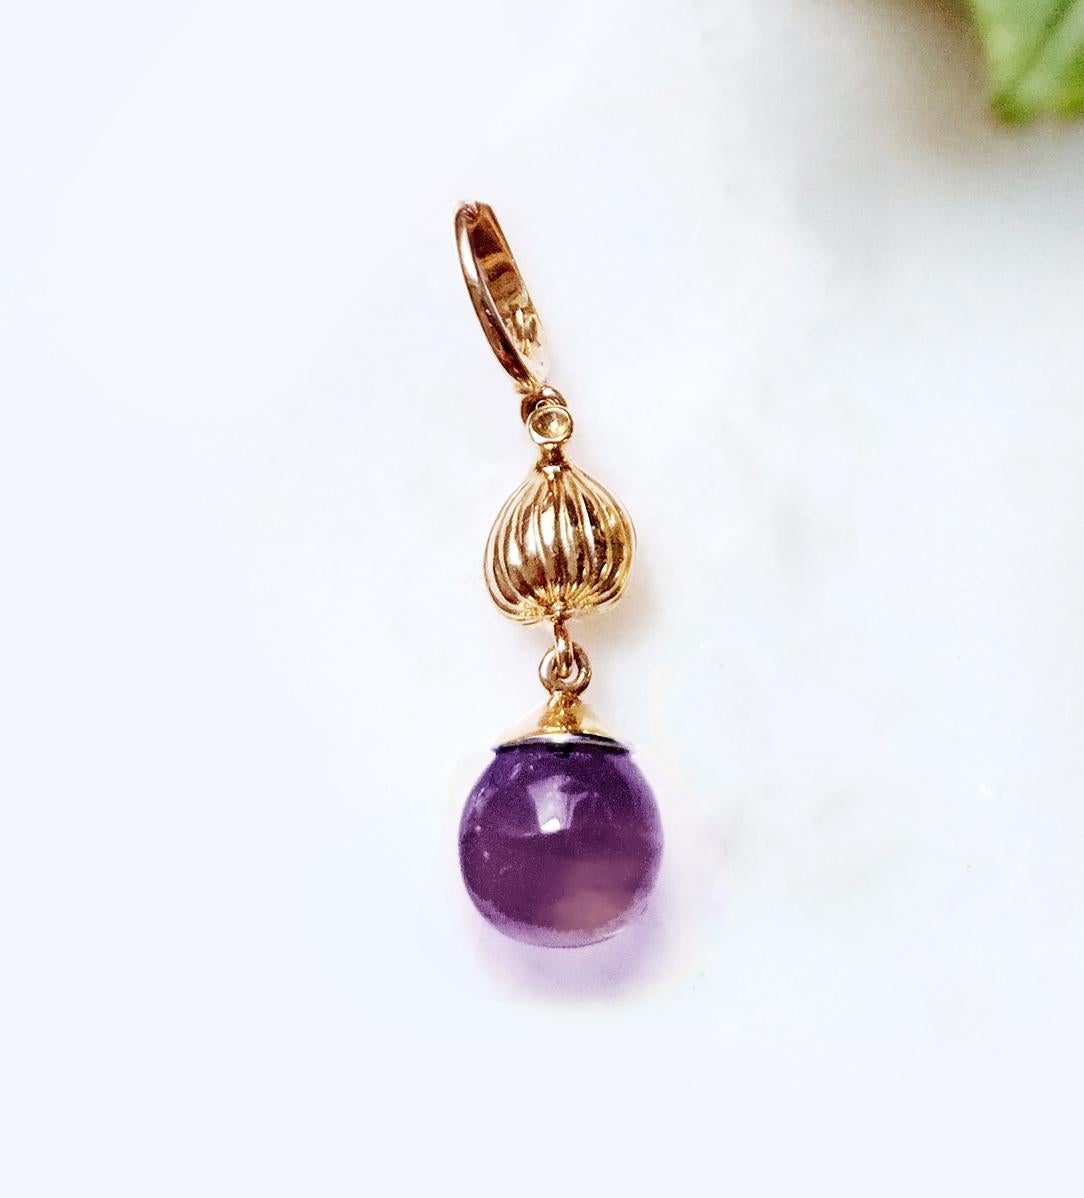 Women's or Men's Rose Gold Drop Pendant Necklace with Amethyst by the Artist For Sale